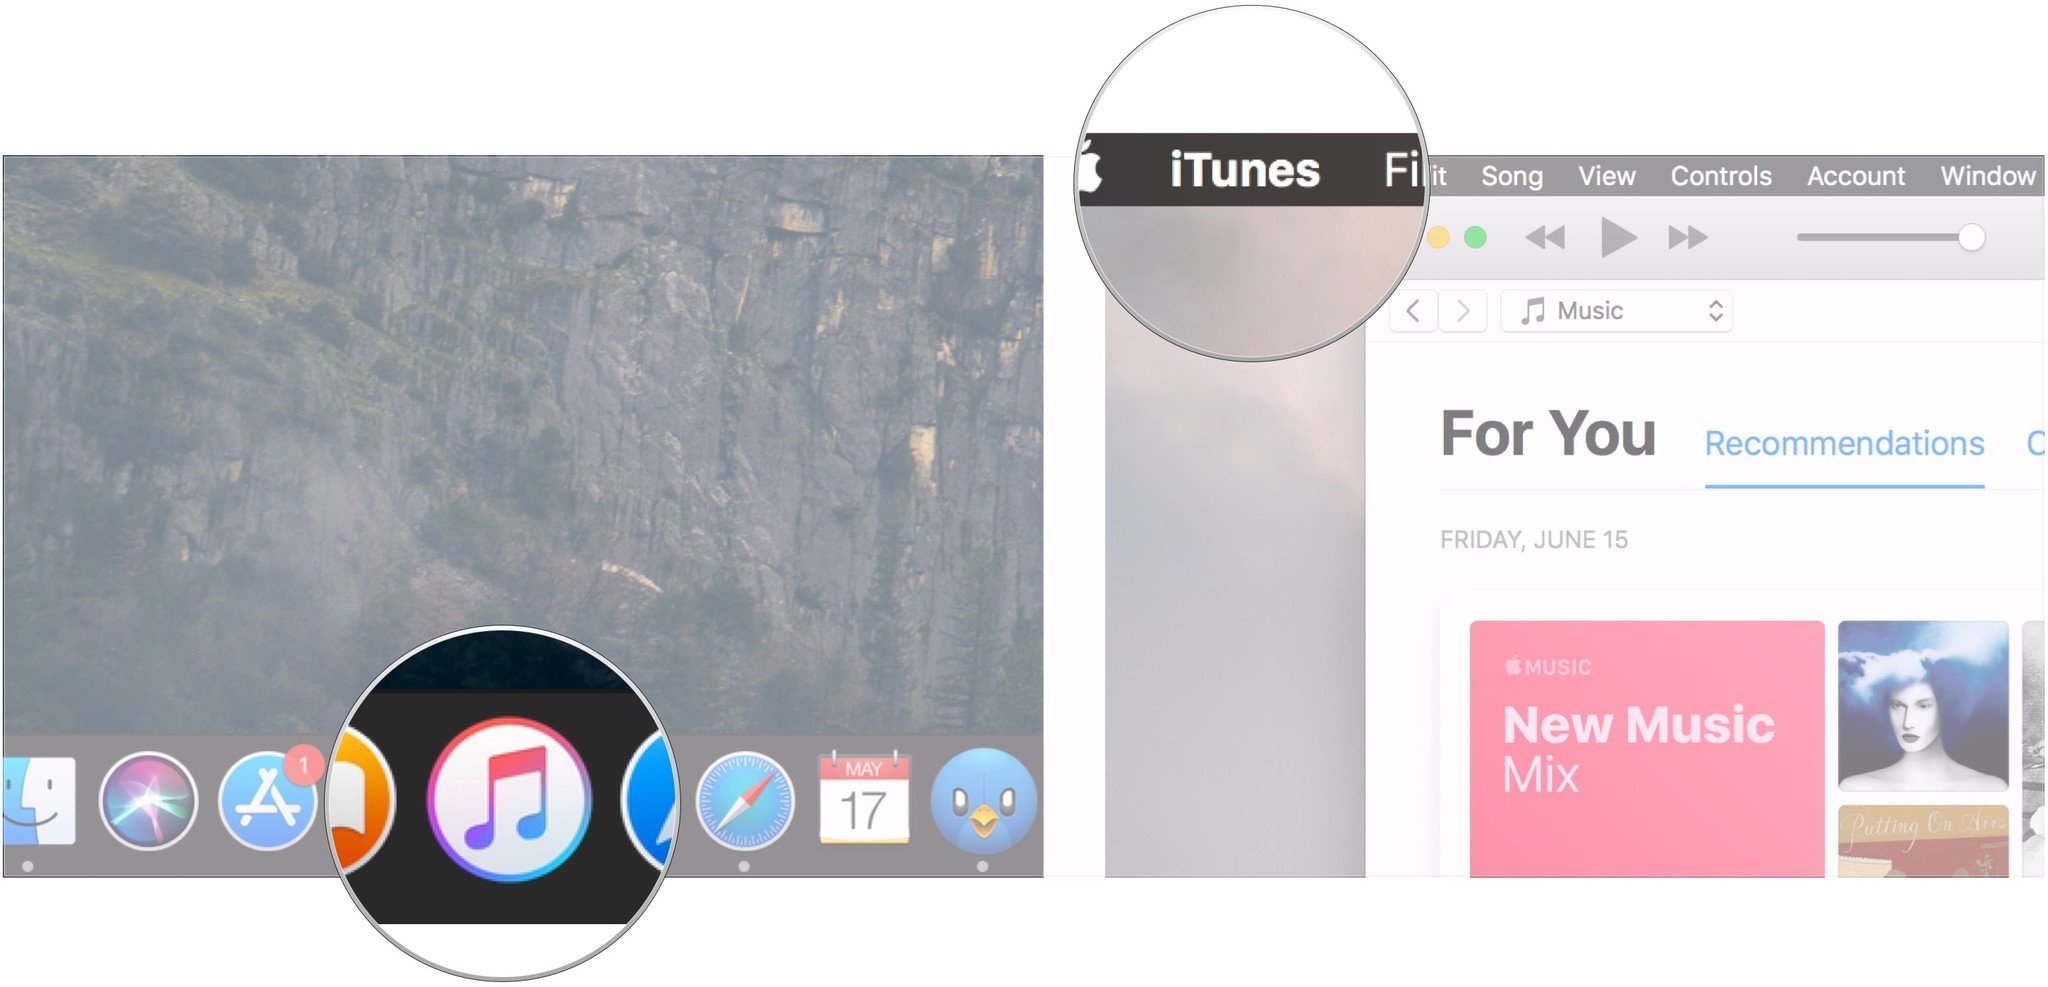 Delete iPhone backup on macOS Mojave showing how to open iTunes and click iTunes in the Menu bar